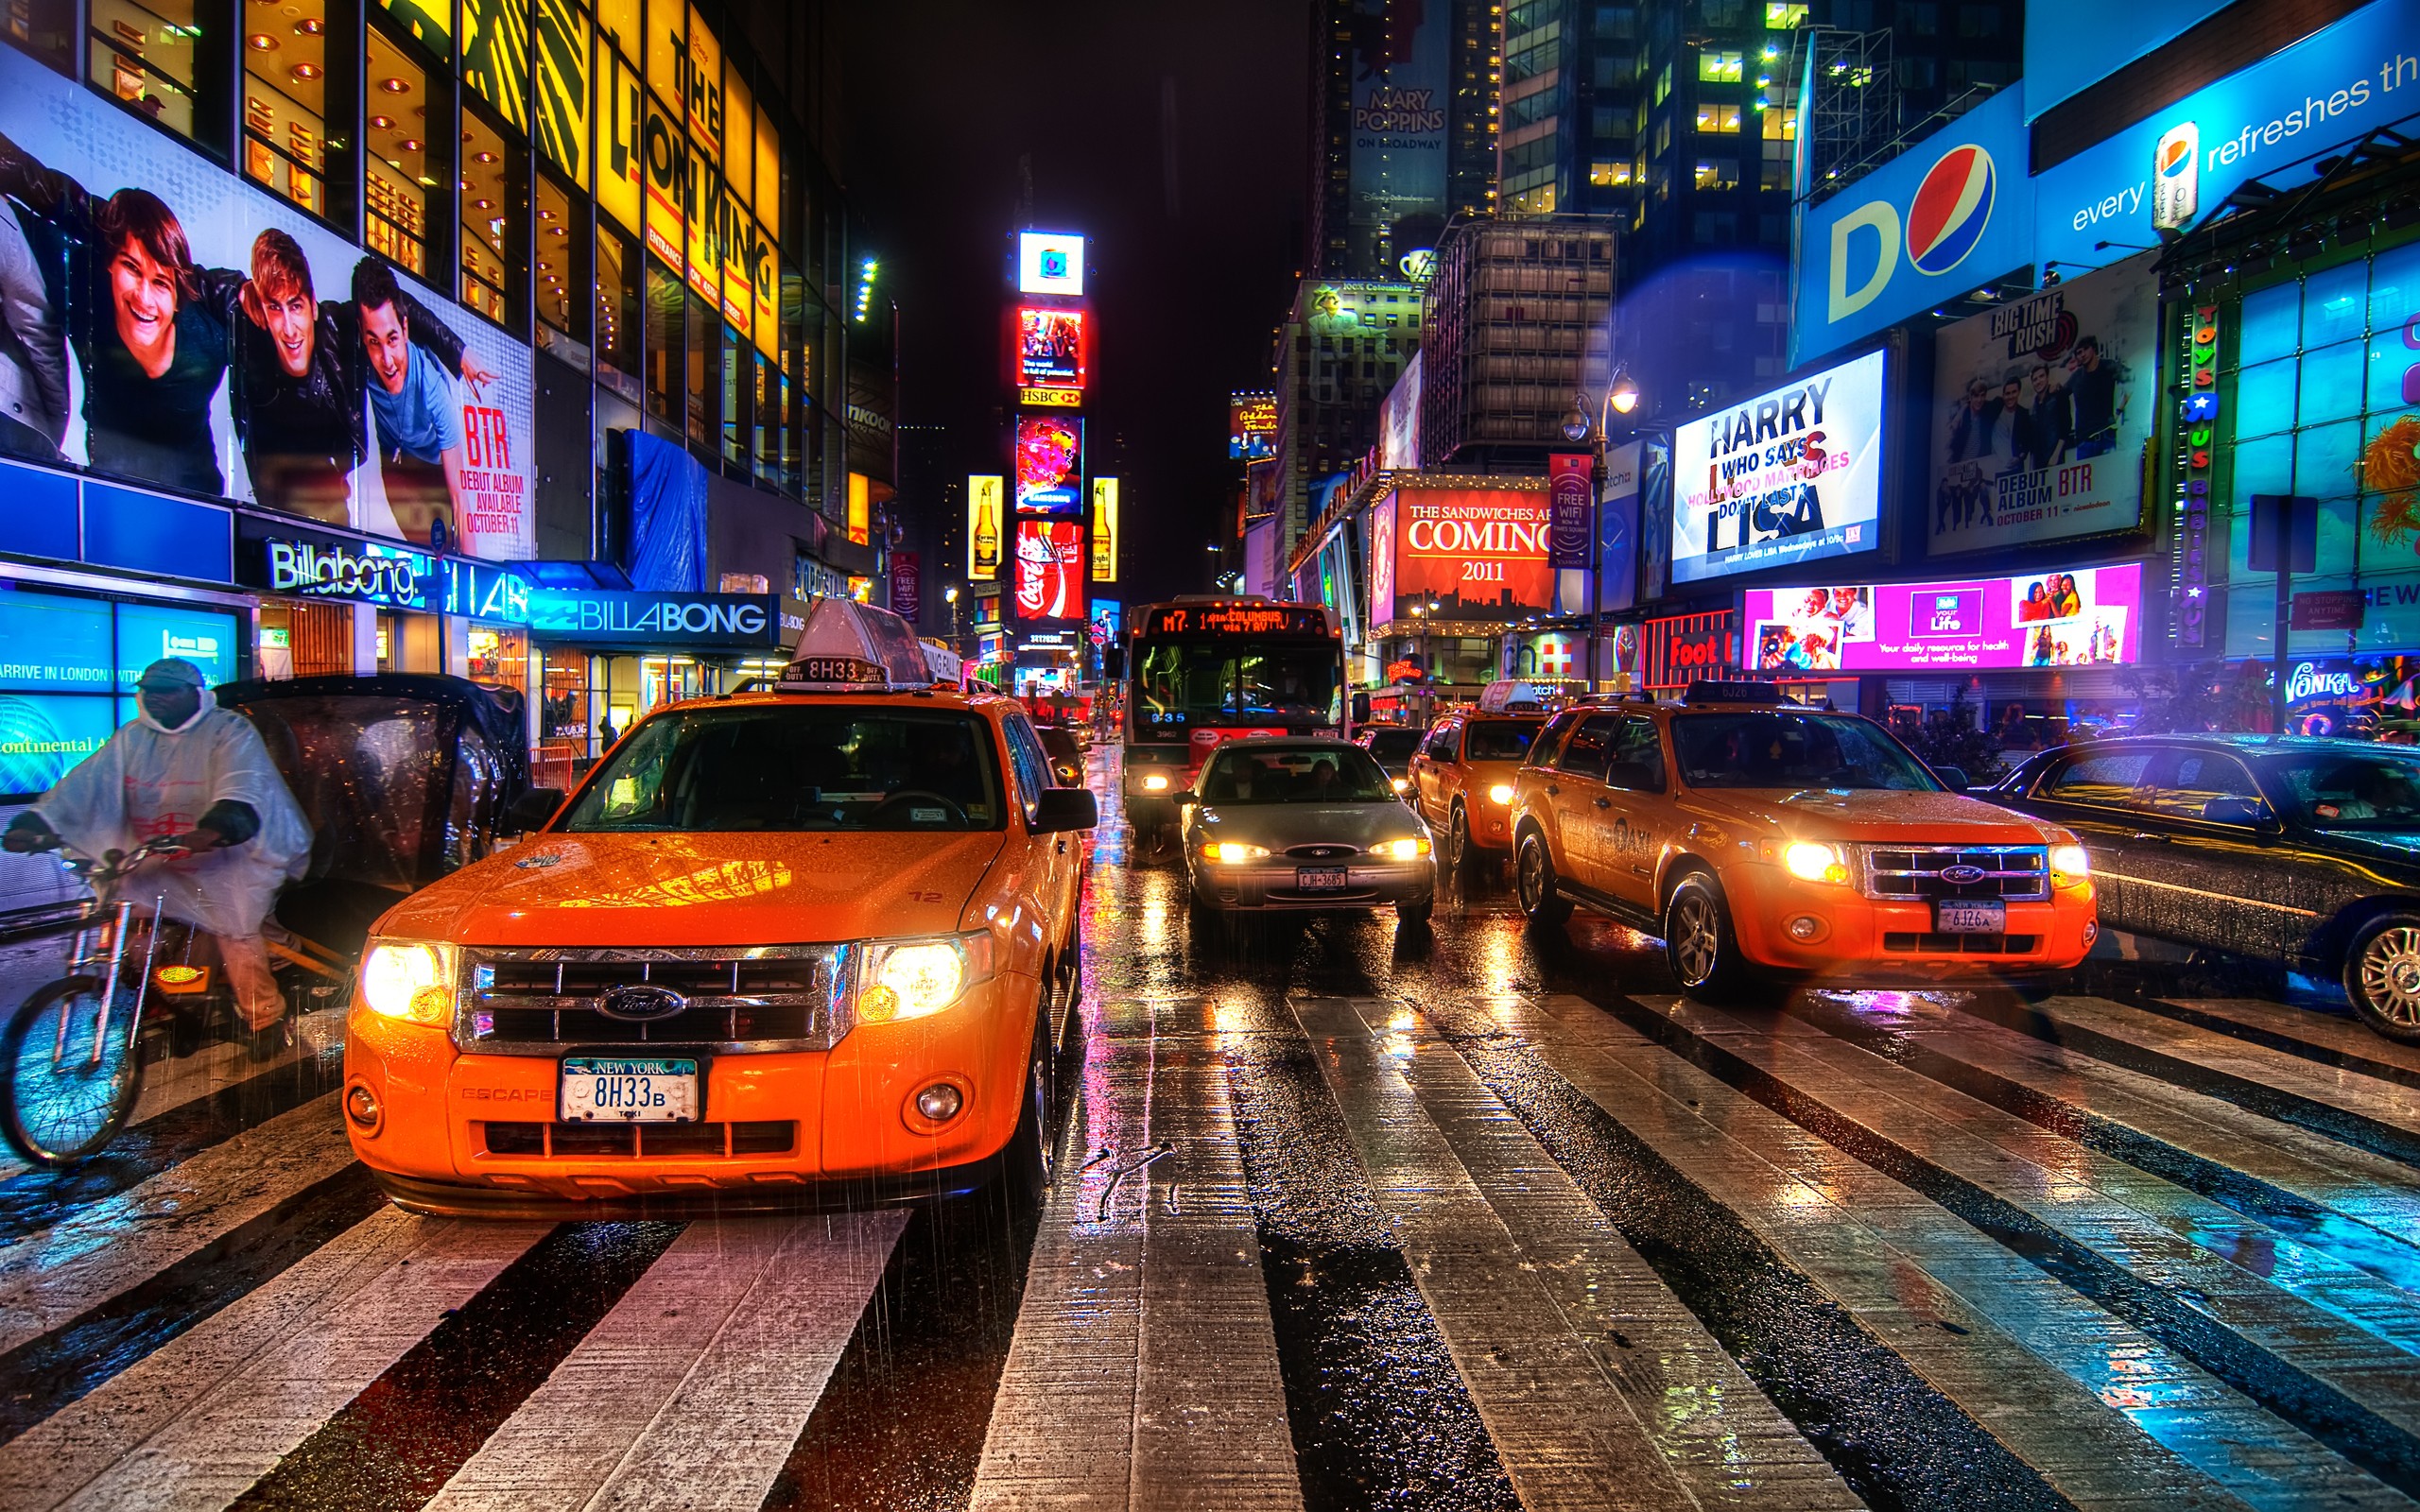  cityscapes streets traffic new york city times square ny HD Wallpapers